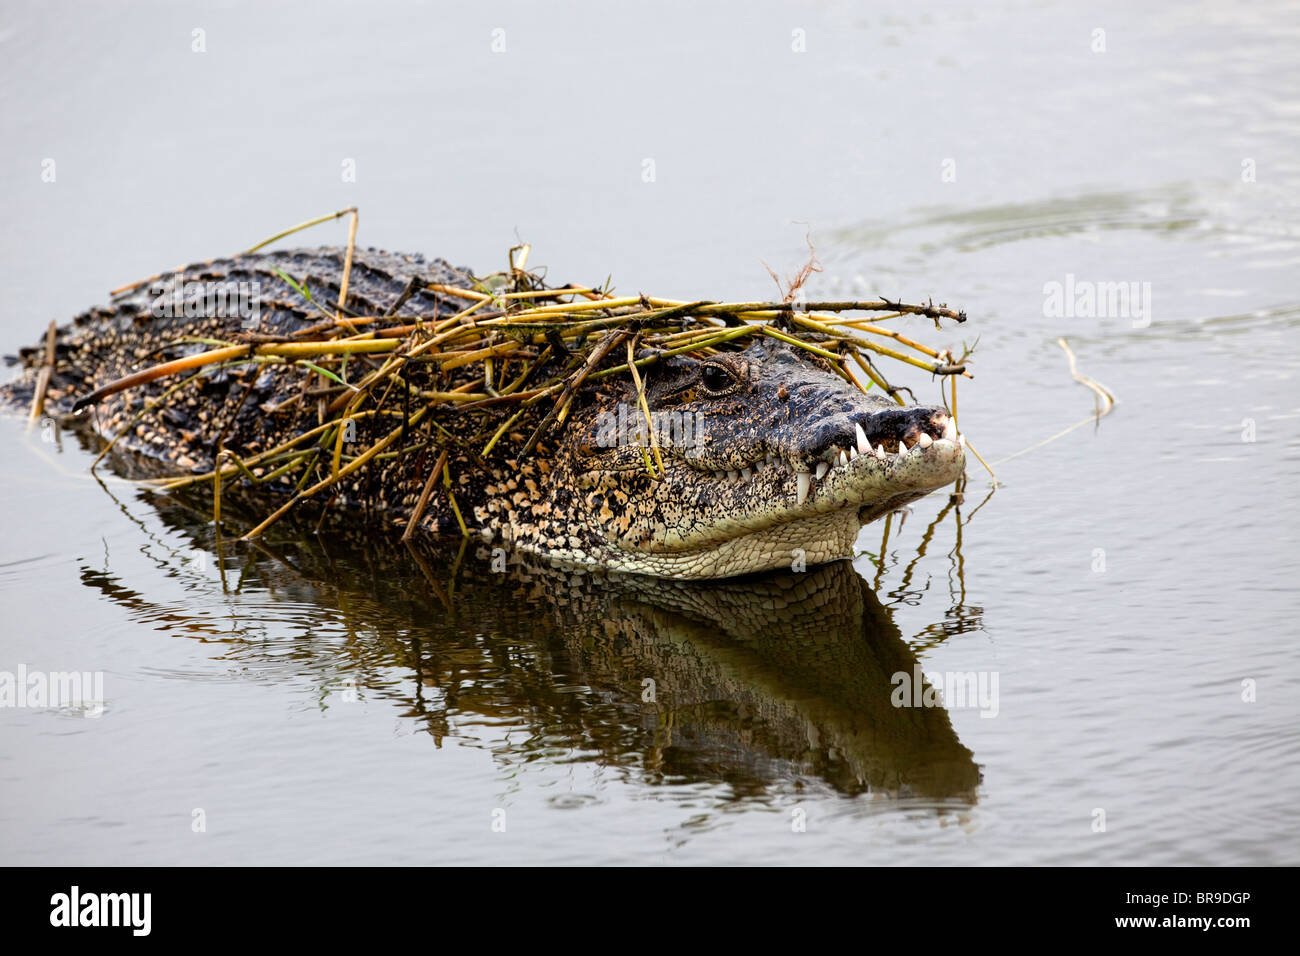 Cuban crocodile covered by reeds. Stock Photo